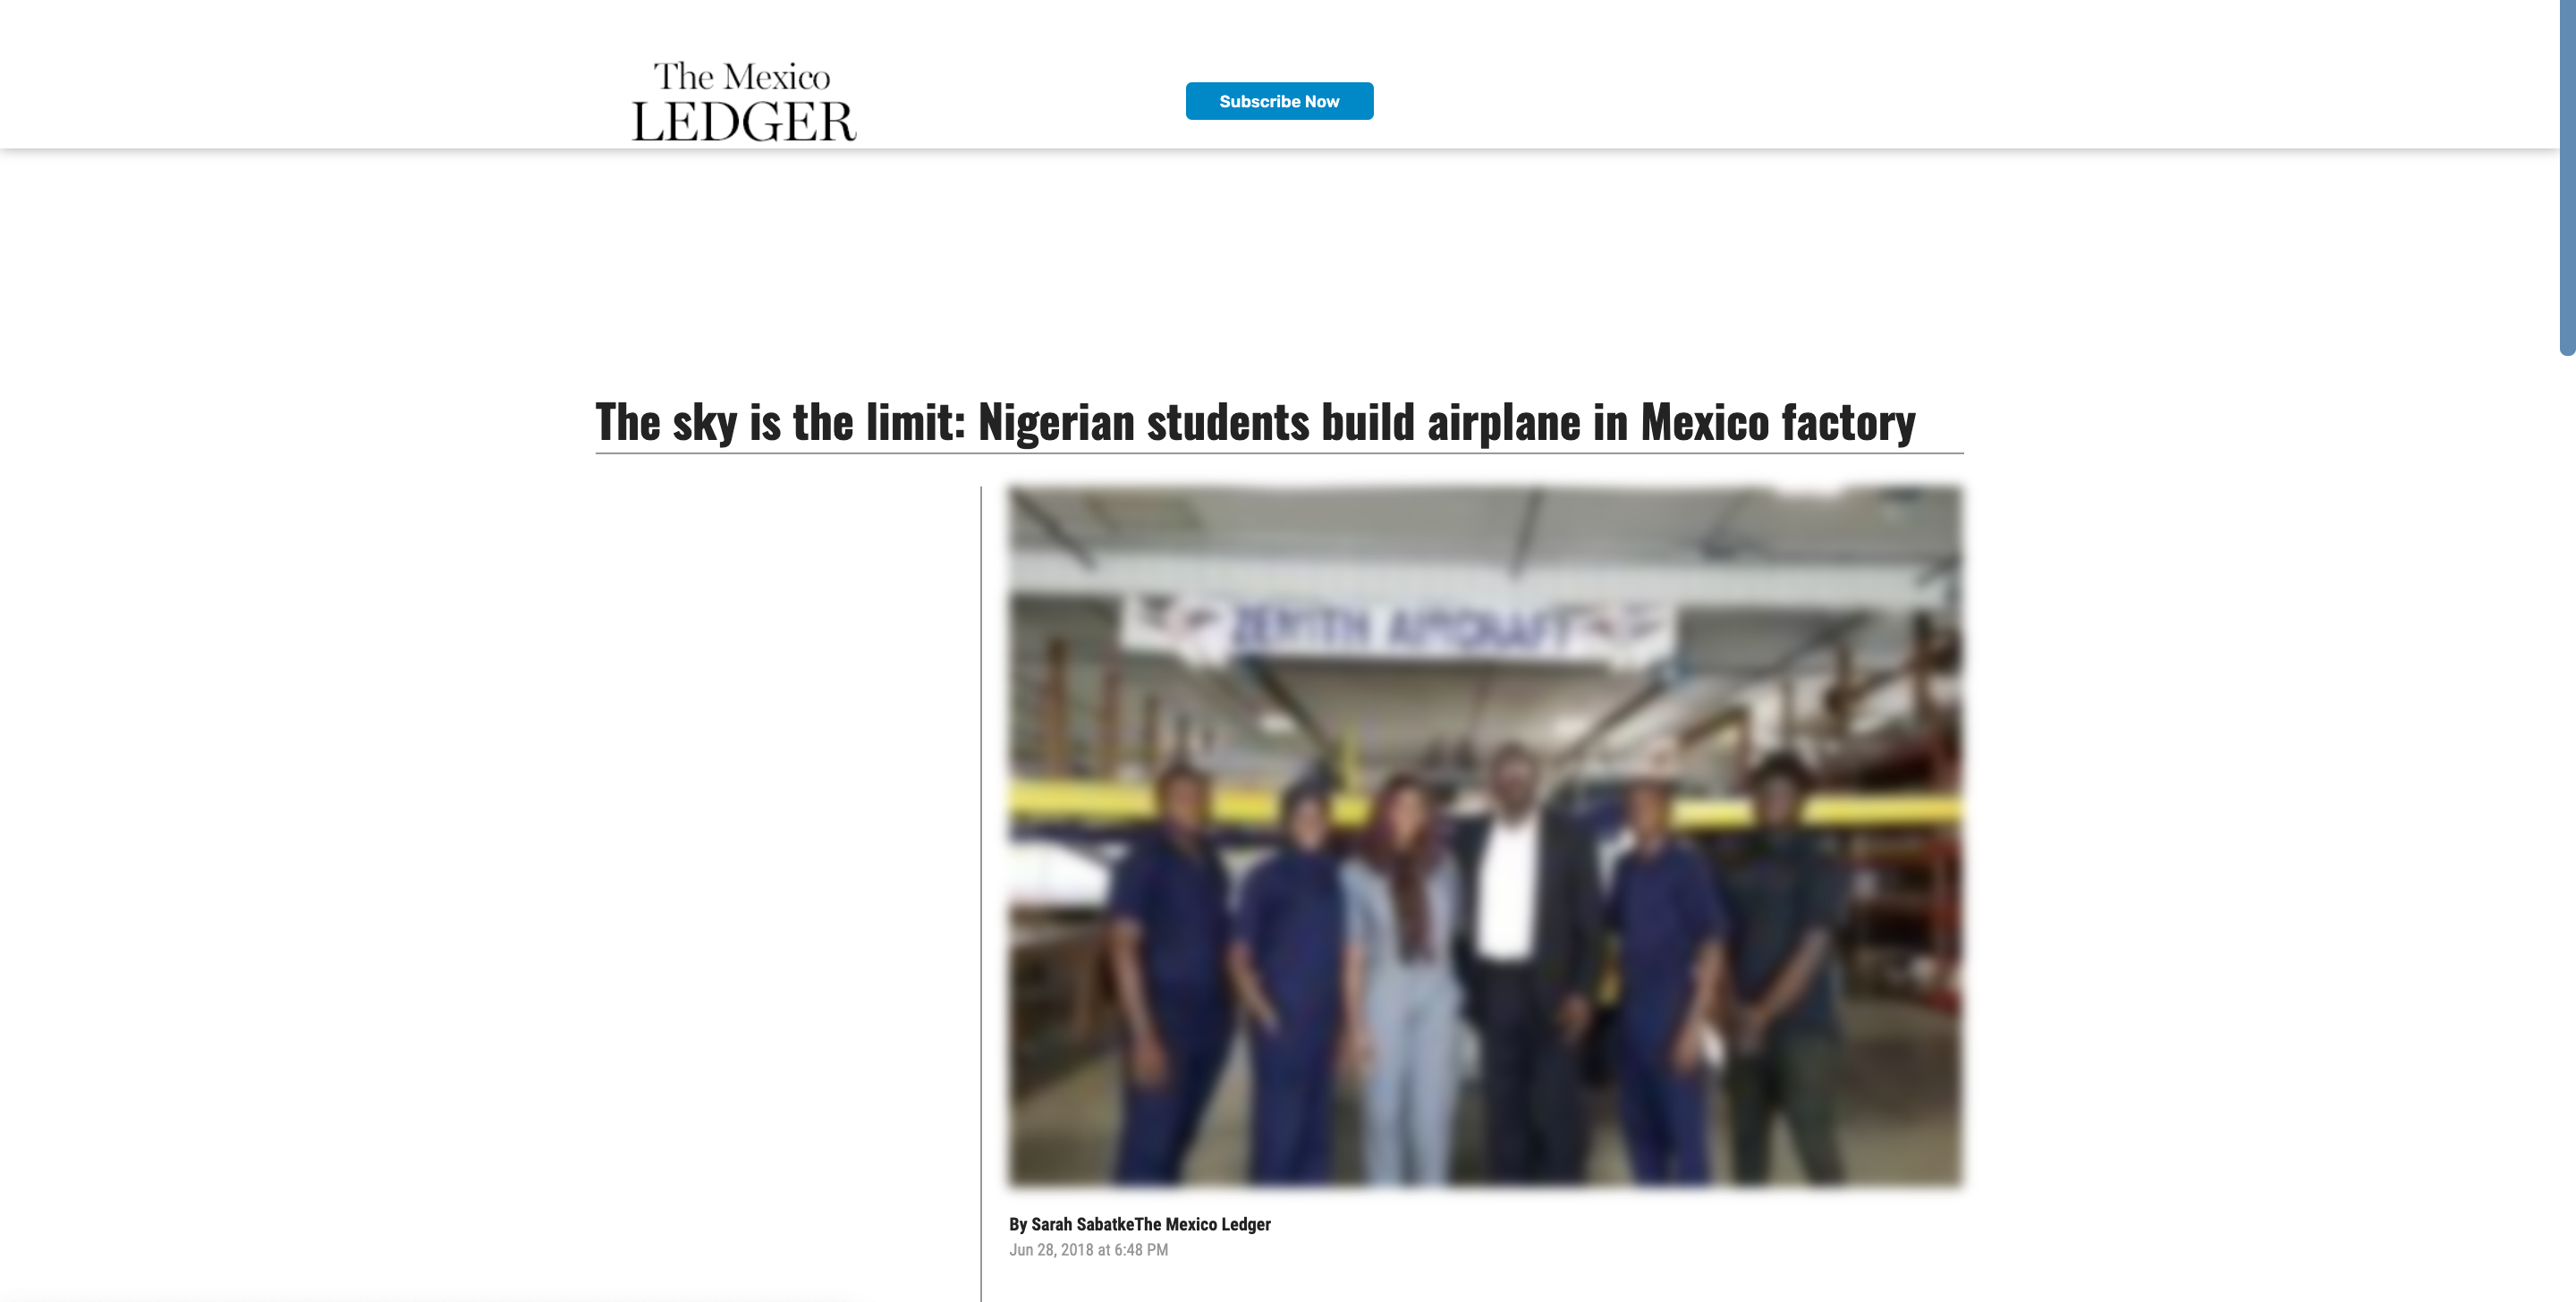 The sky is the limit: Nigerian students build airplane in Mexico factory